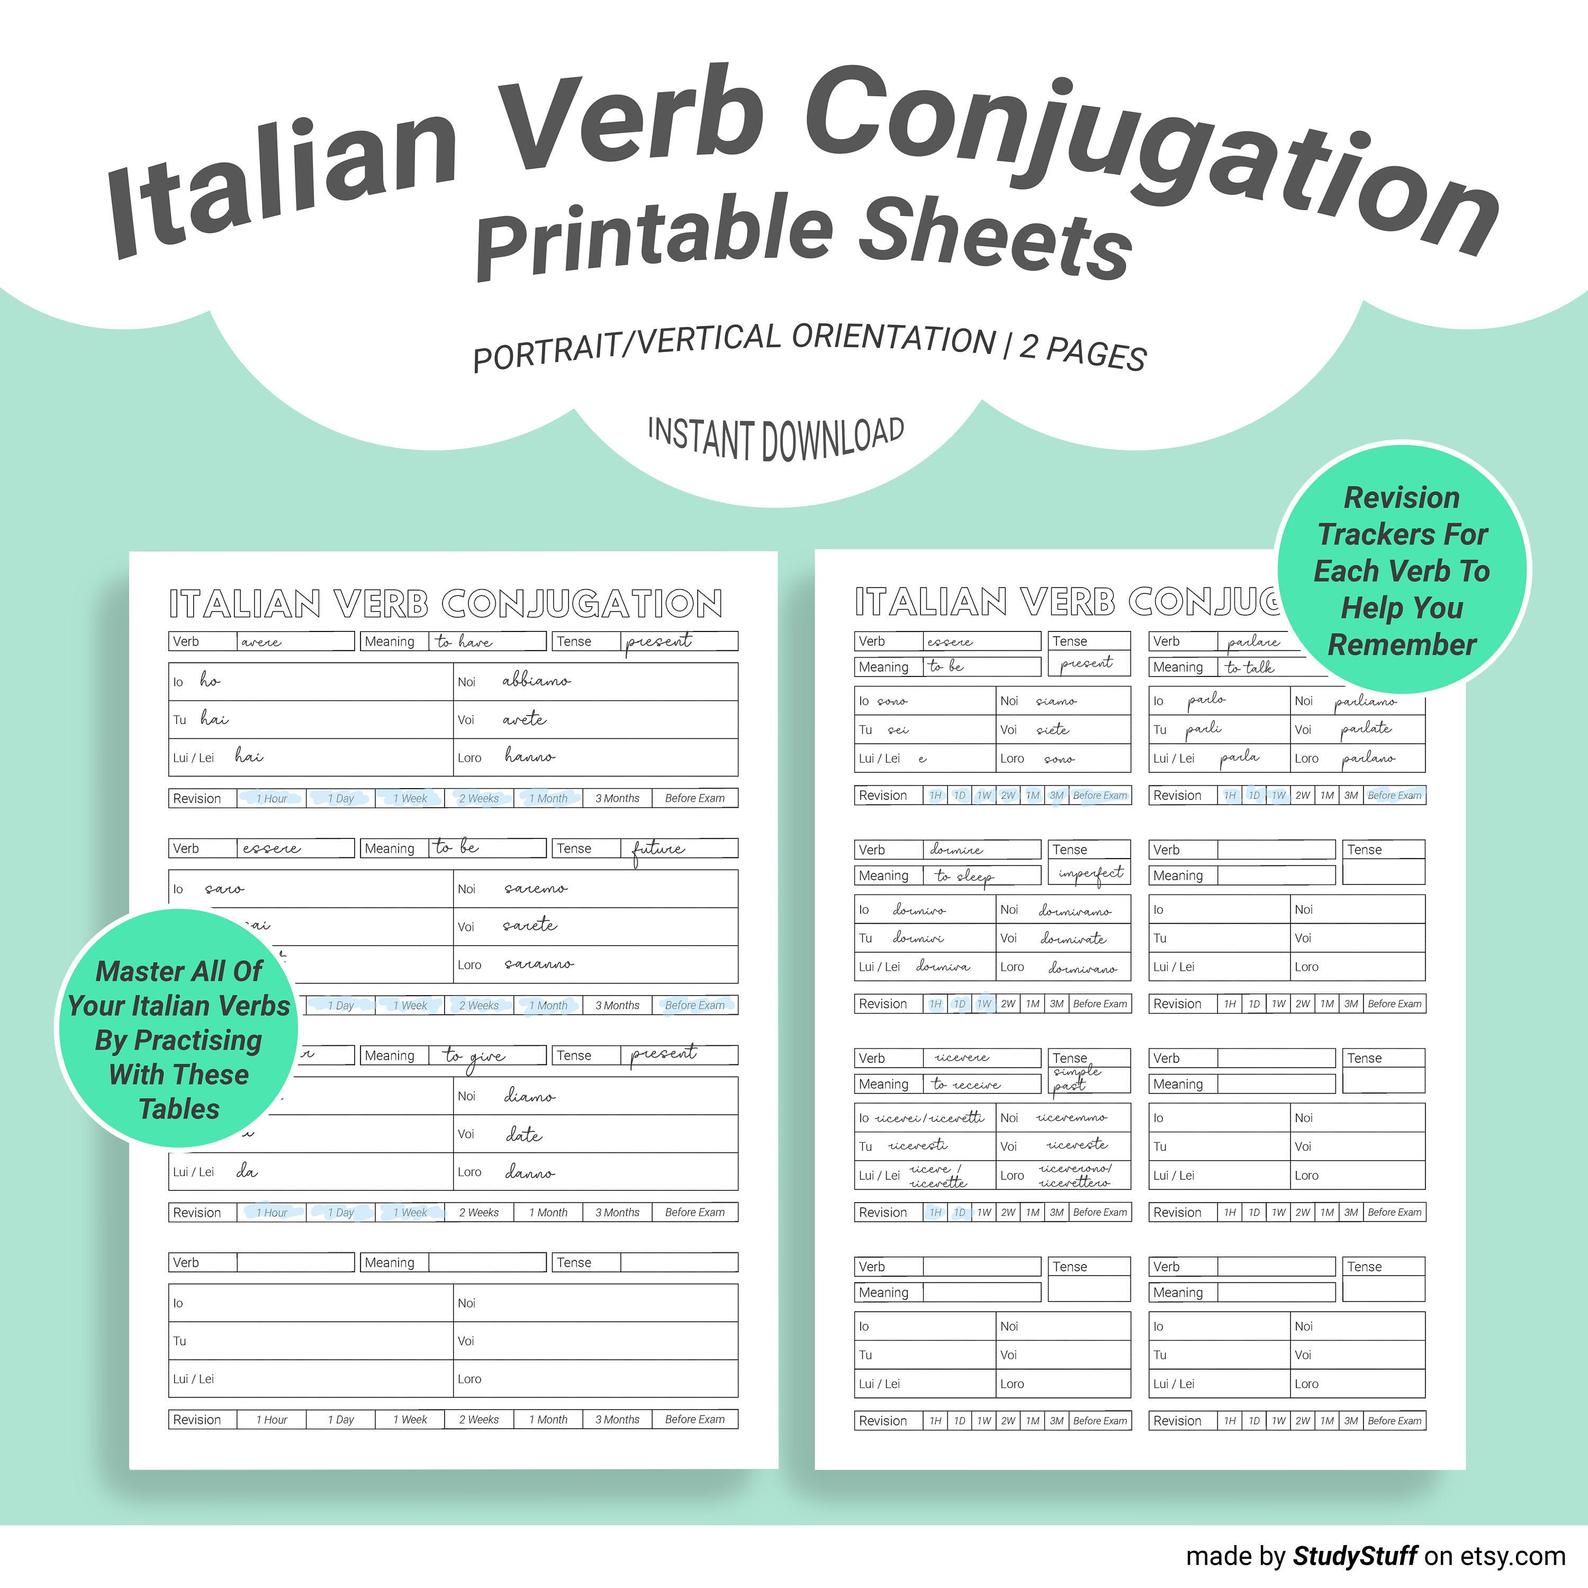 Use This Conjugation Worksheet To Master Your Italian Verbs! StudyStuff